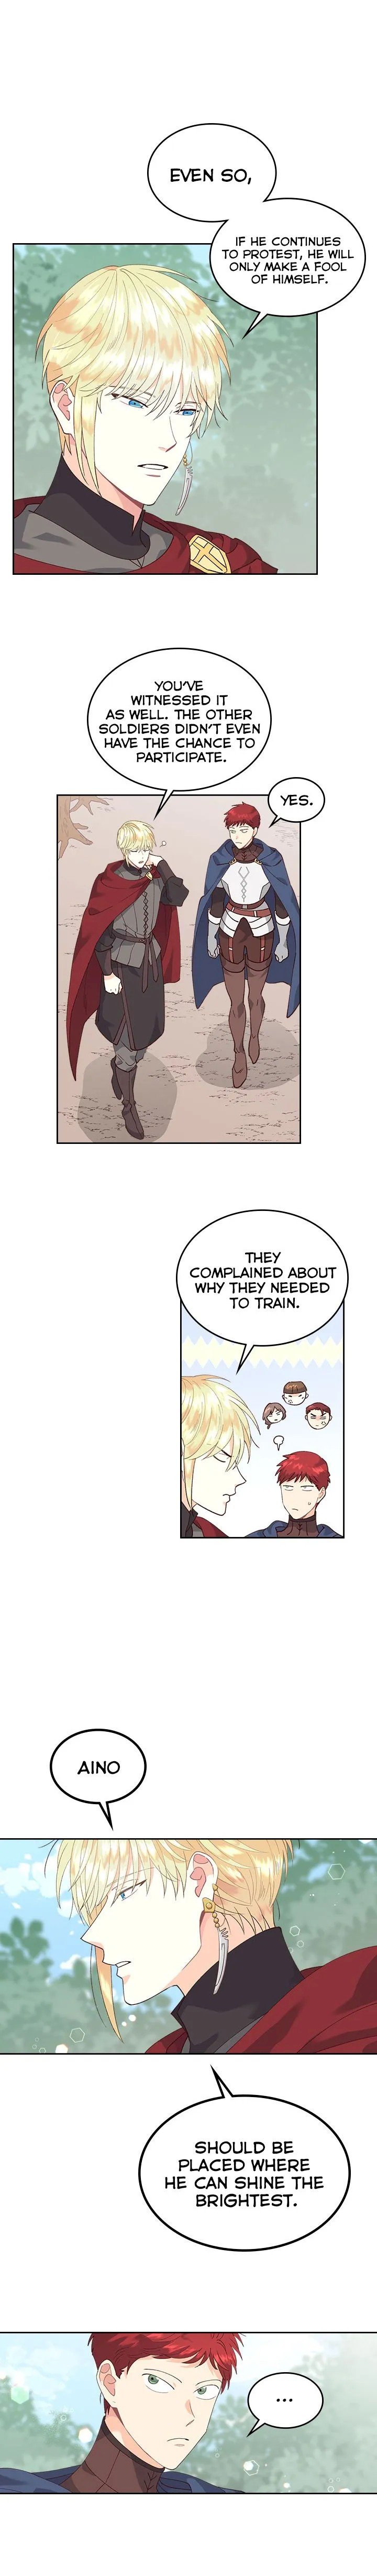 emperor-and-the-female-knight-chap-33-2